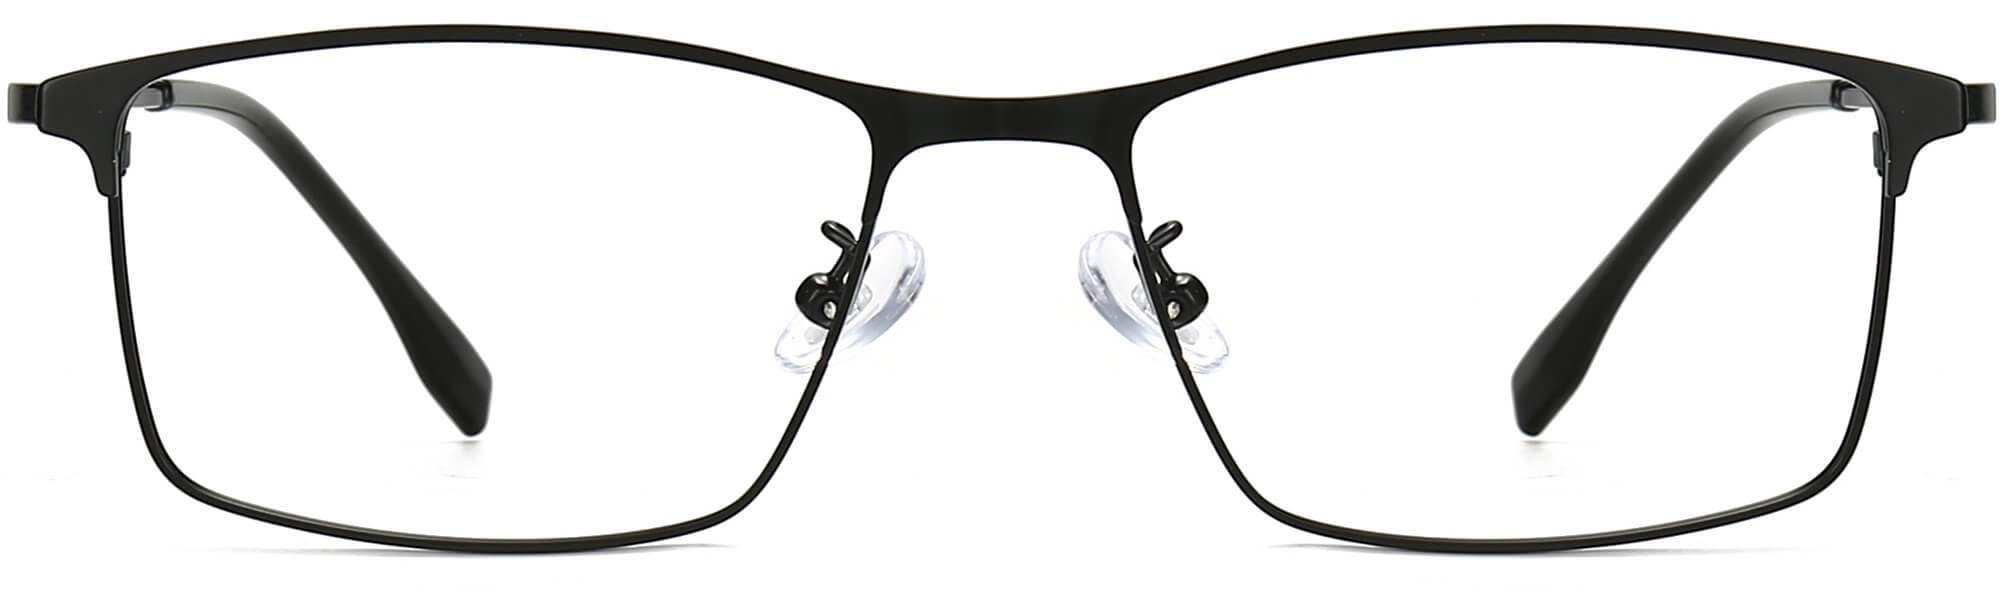 Ty Square Black Eyeglasses from ANRRI, front view